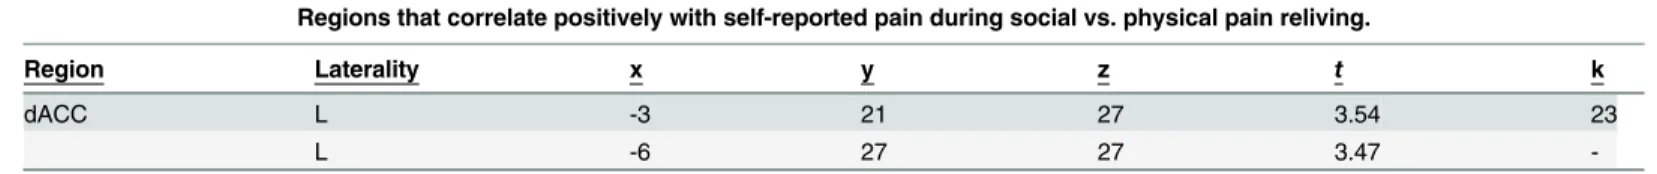 Table 2. Regression results. Regions that correlate positively with self-reported pain during social vs